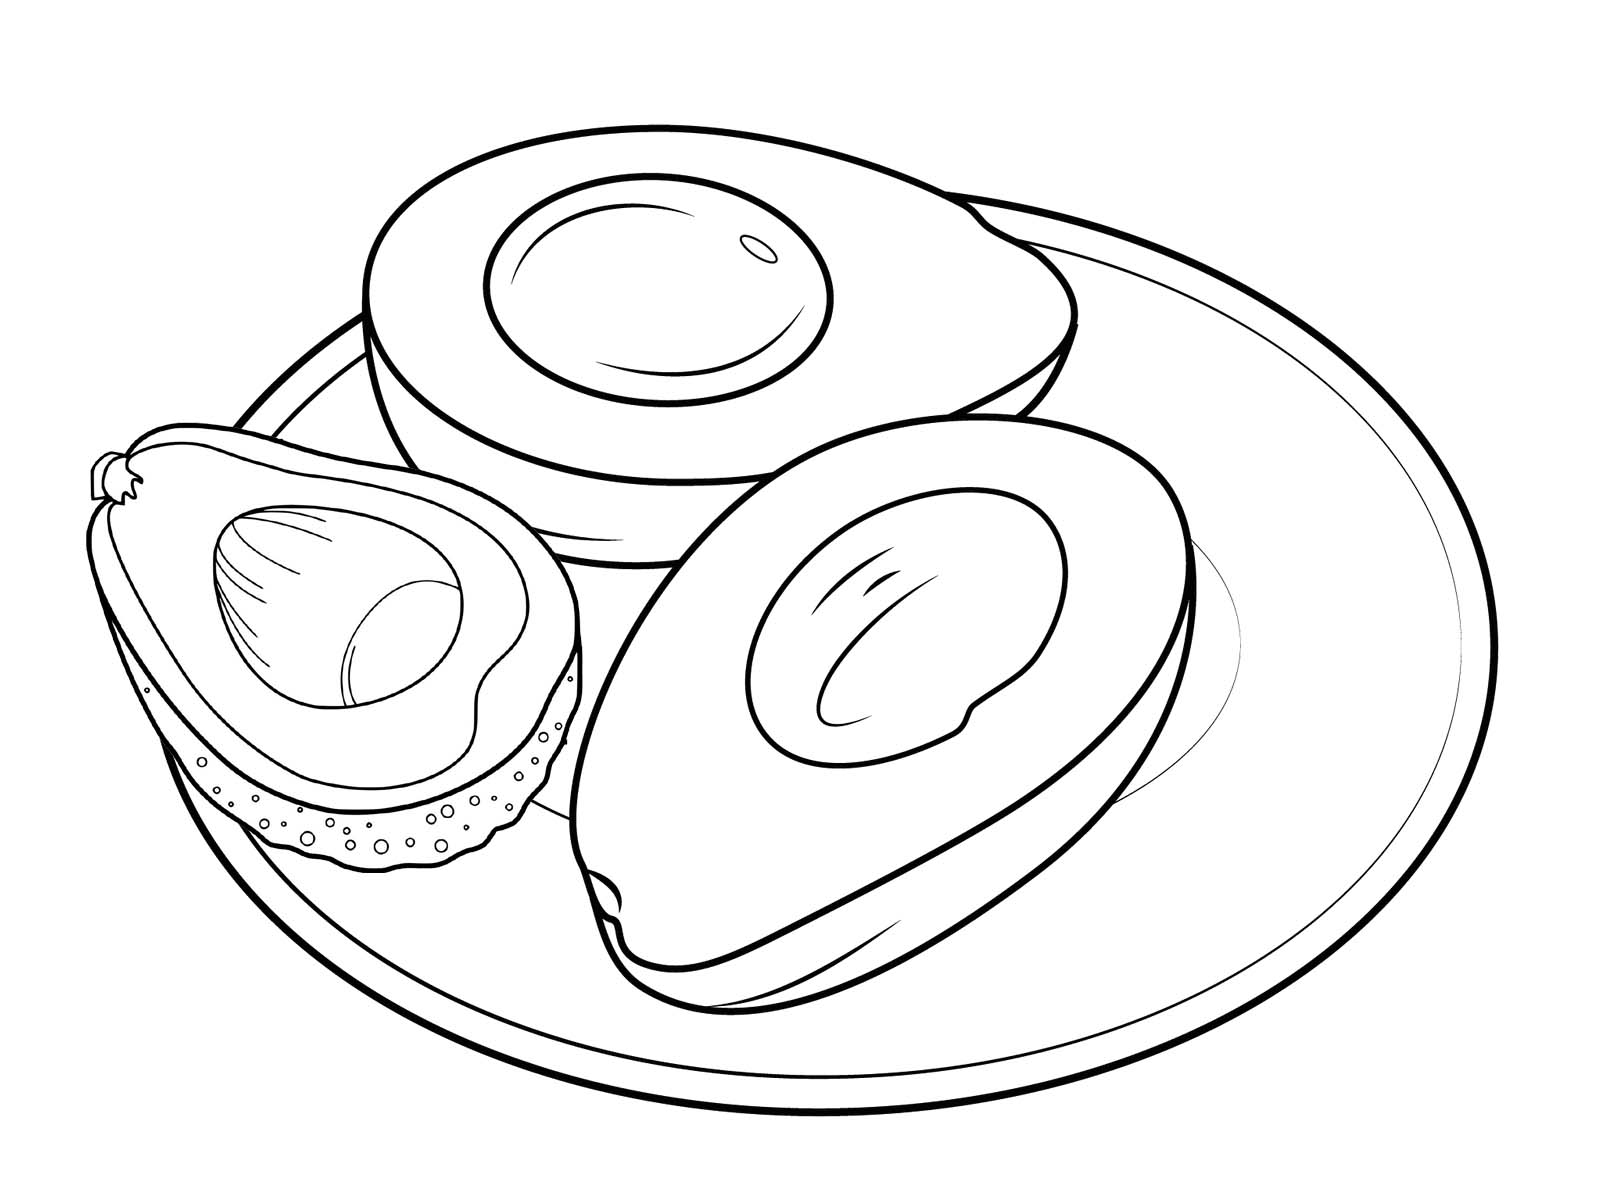 avocado in a plate coloring page